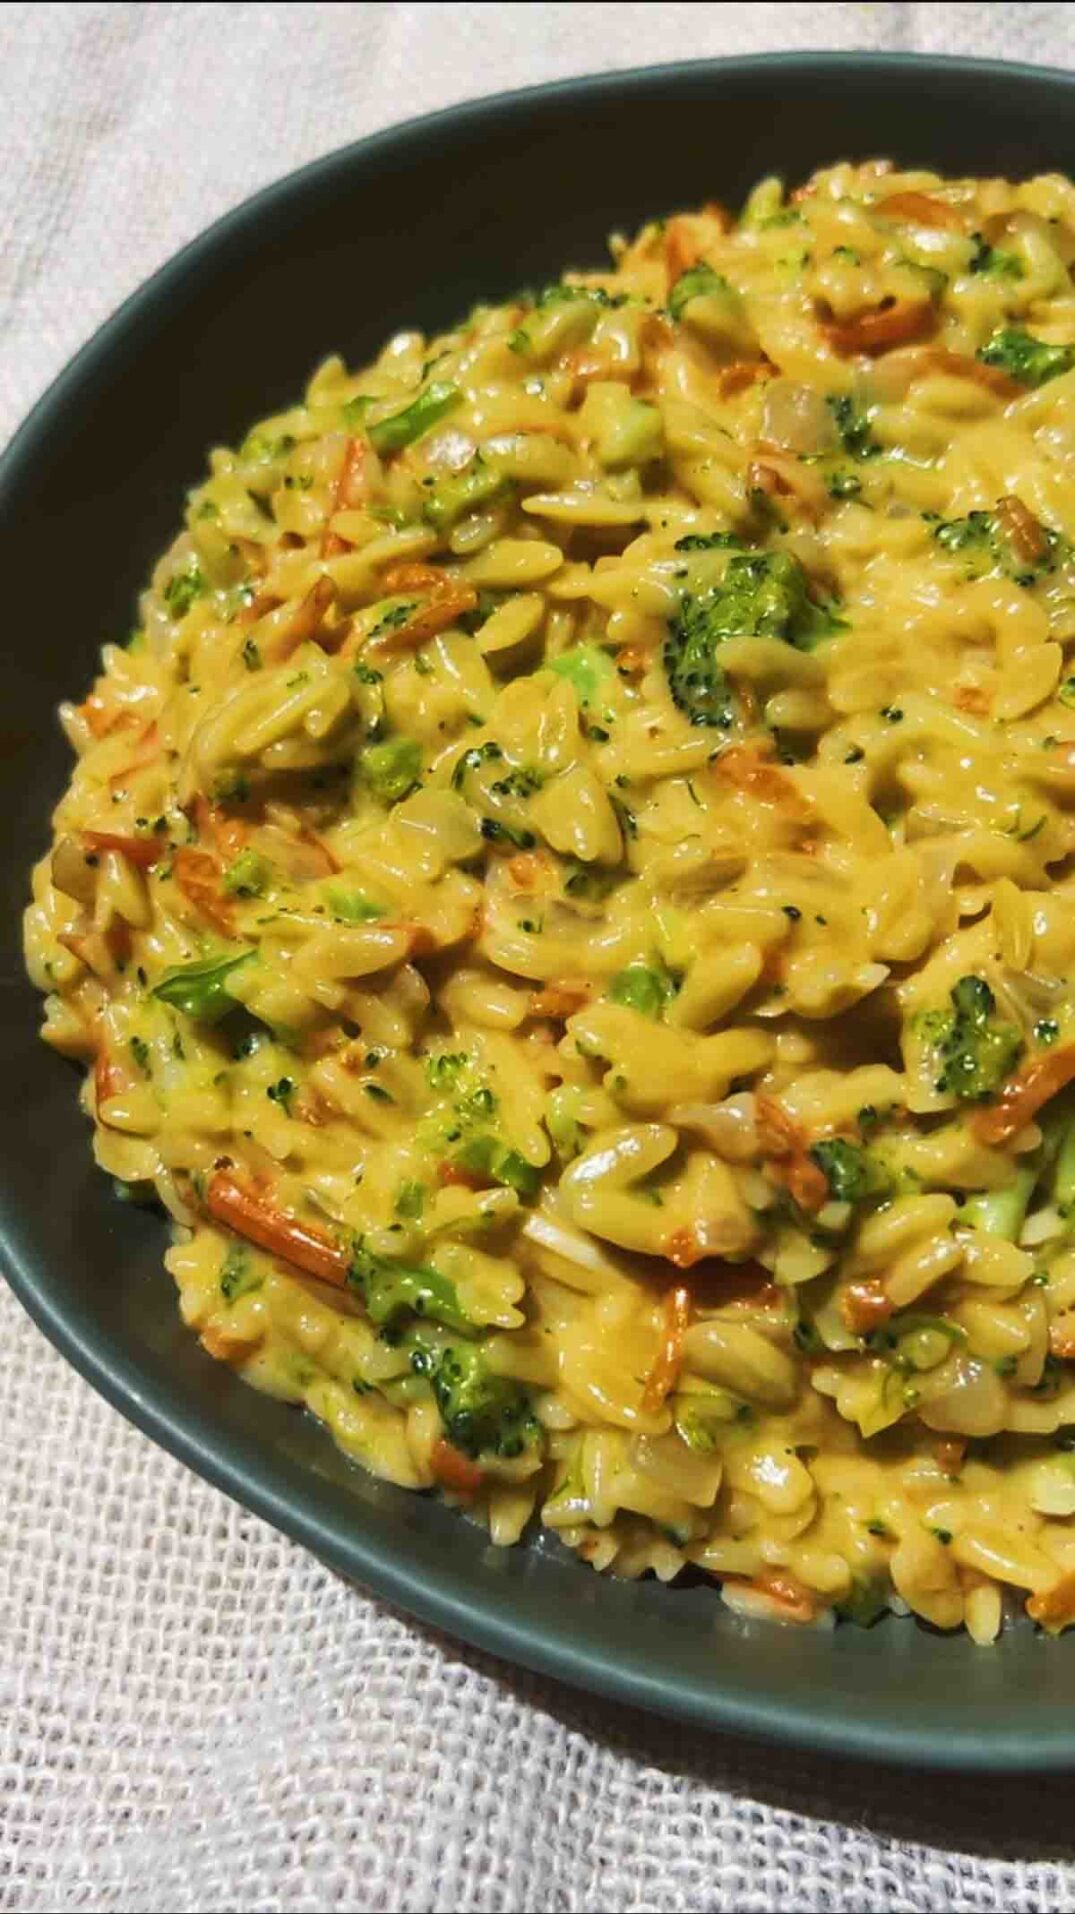 cheesy orange orzo in a green bowl with bits of broccoli and carrot in it.